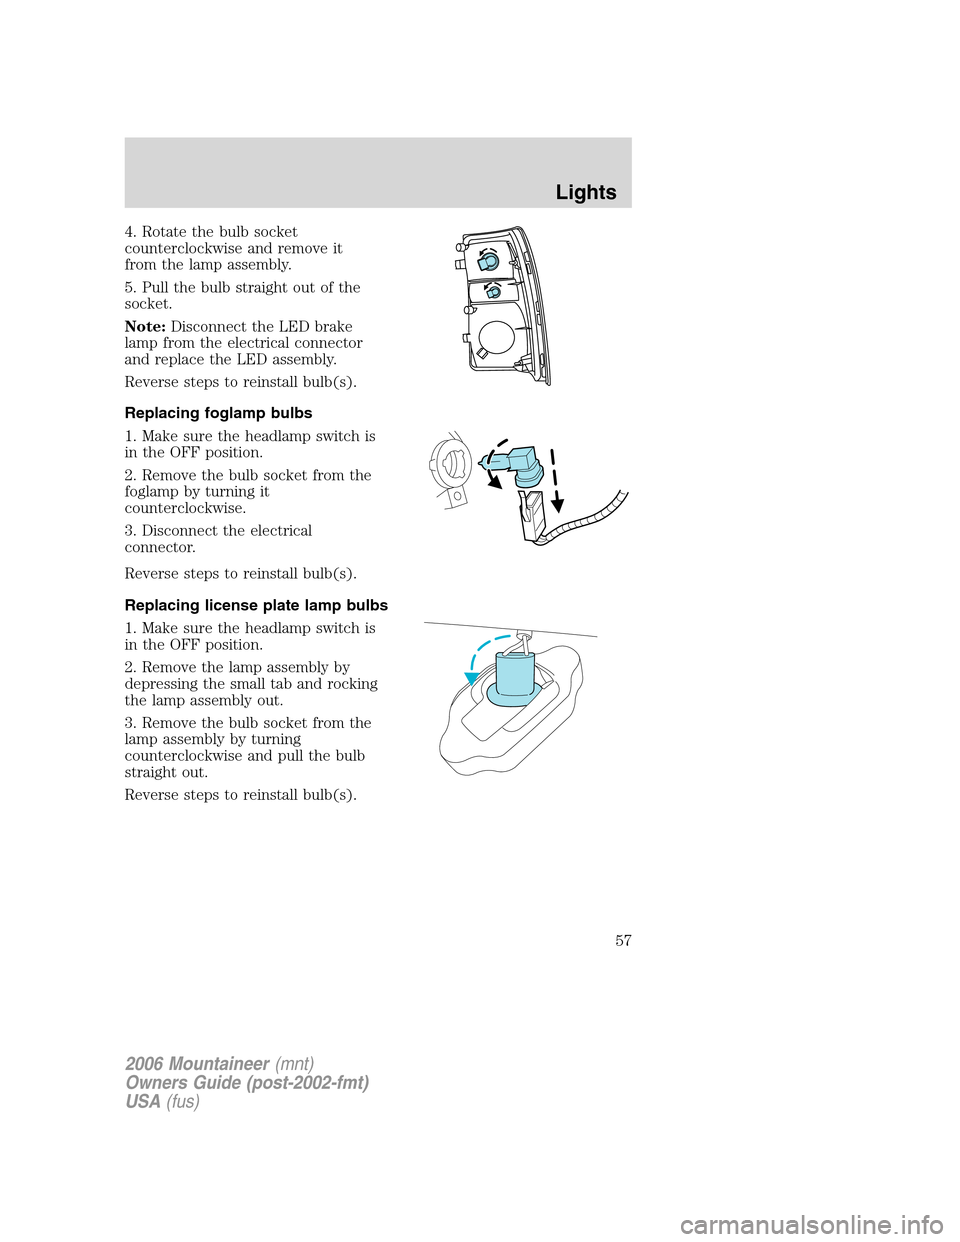 Mercury Mountaineer 2006  Owners Manuals 4. Rotate the bulb socket
counterclockwise and remove it
from the lamp assembly.
5. Pull the bulb straight out of the
socket.
Note:Disconnect the LED brake
lamp from the electrical connector
and repla